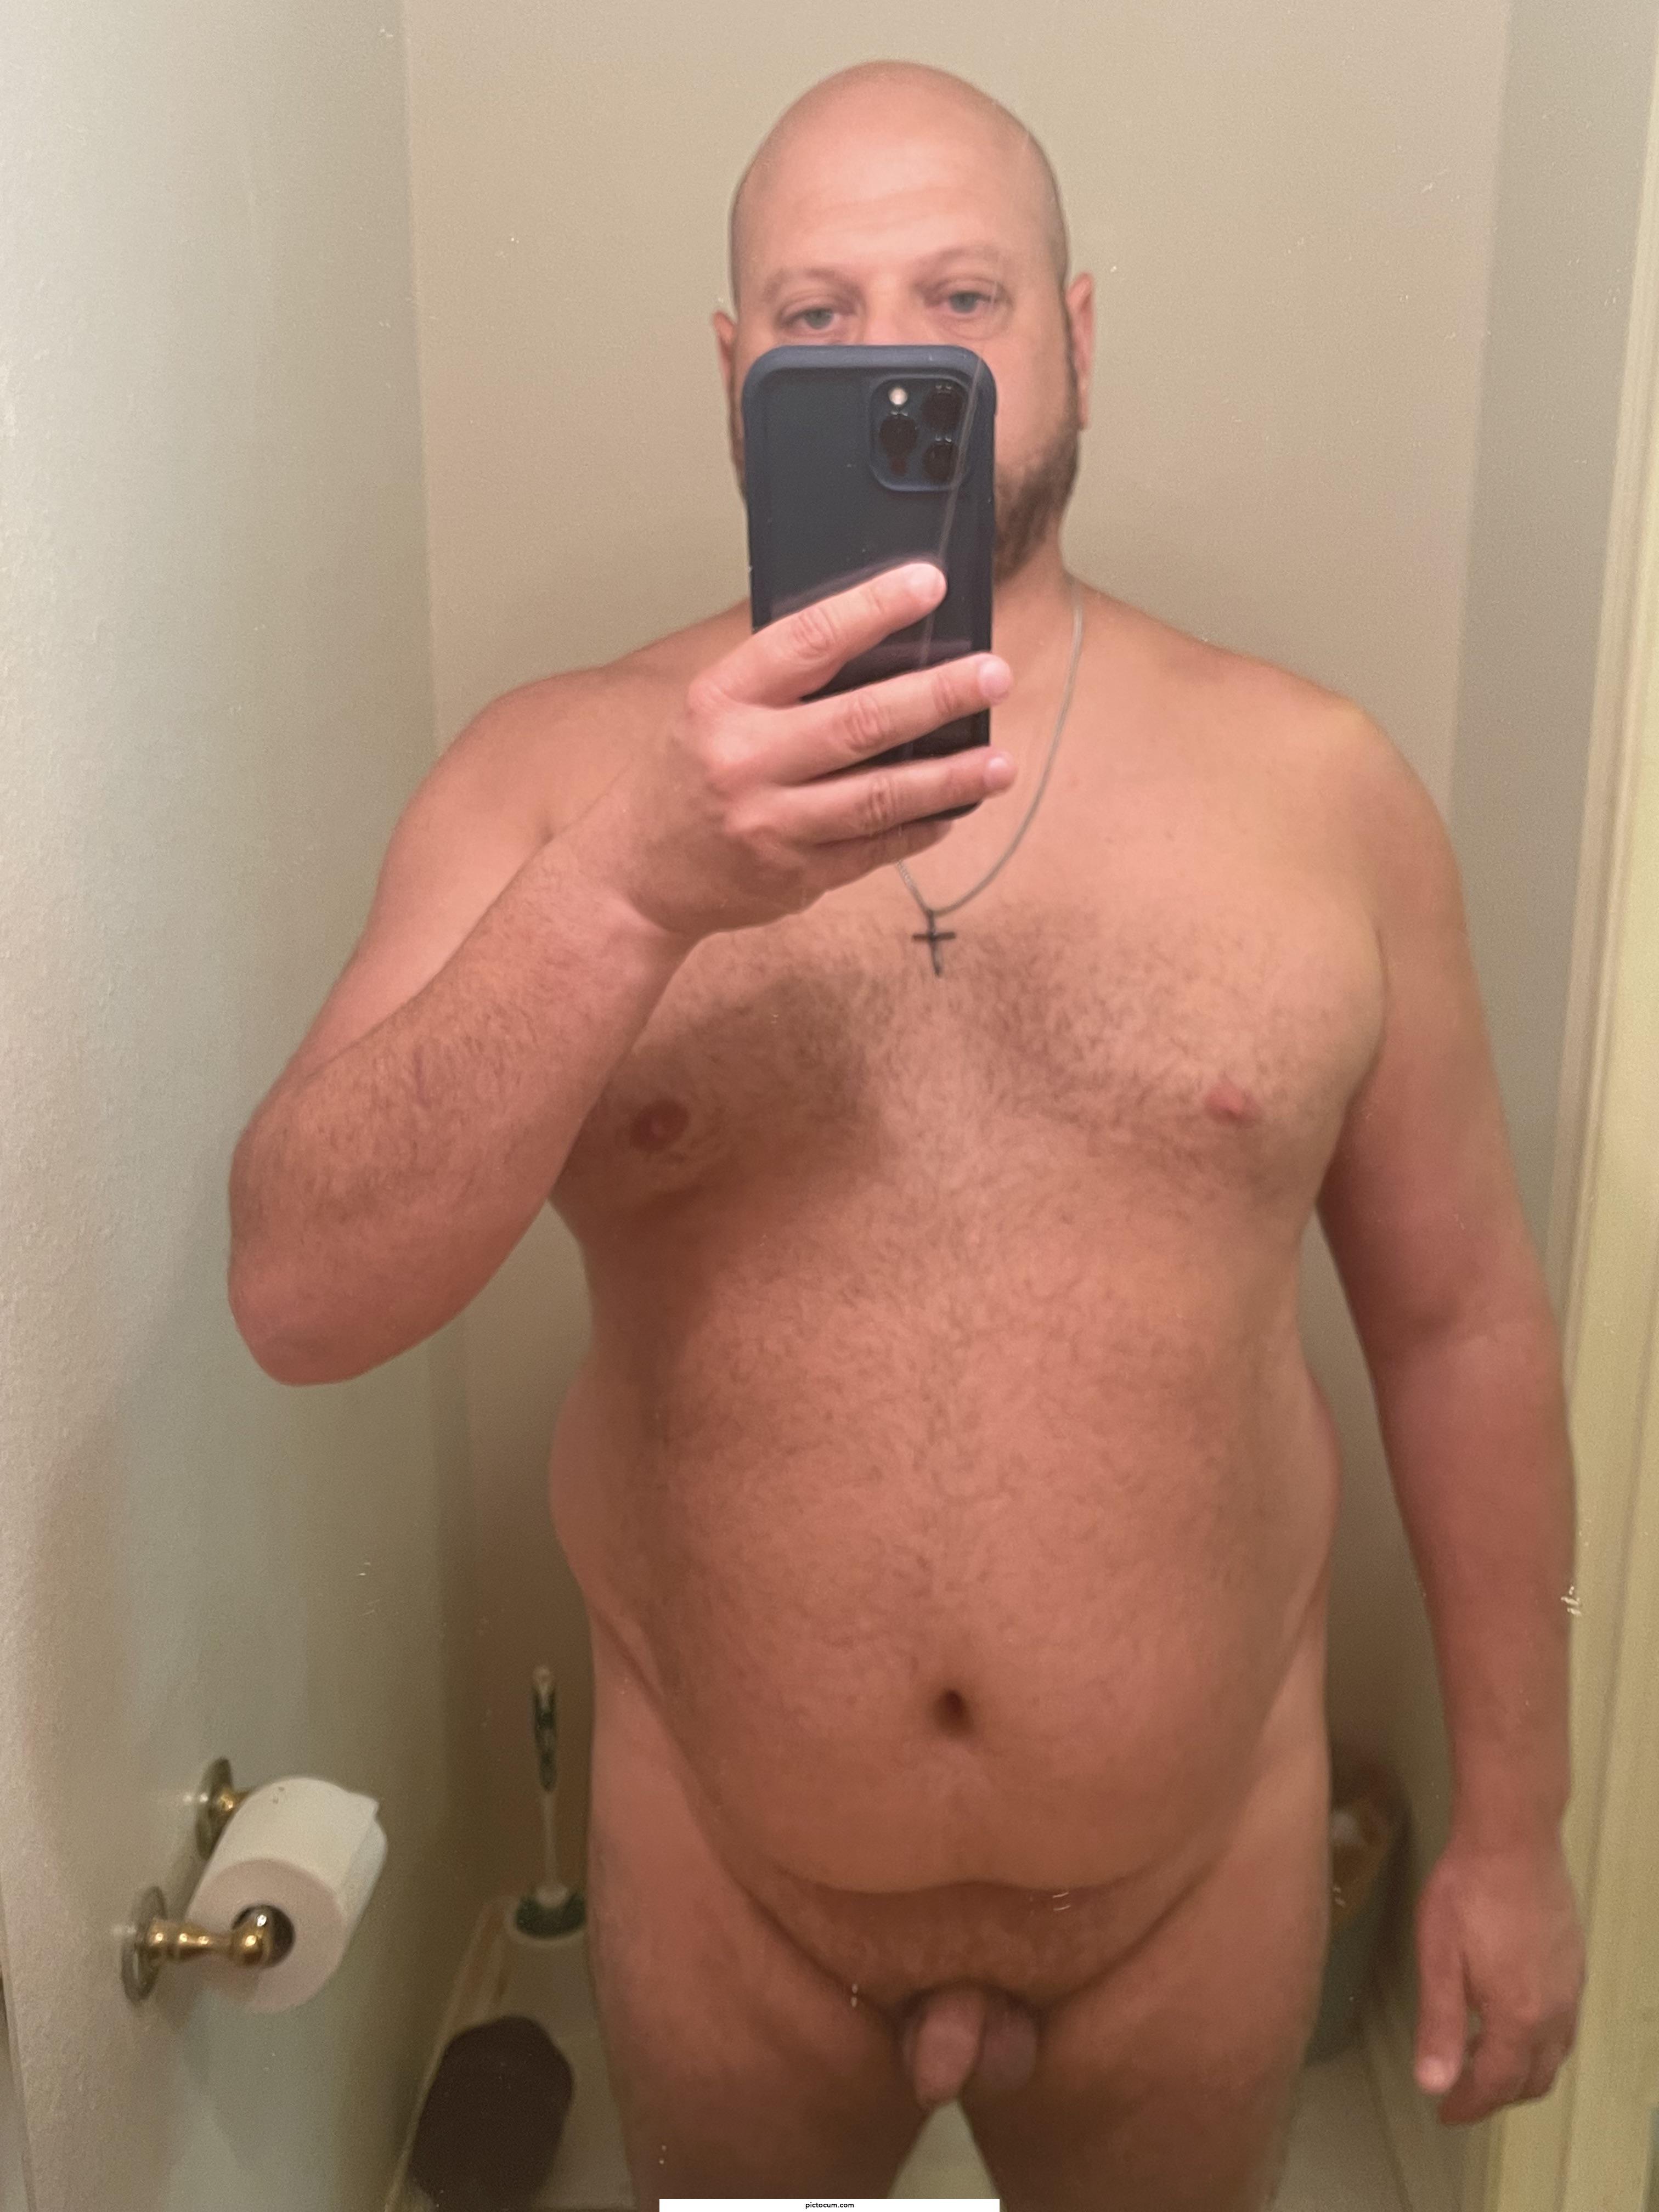  44 5’10 265lbs. Slowly losing weight